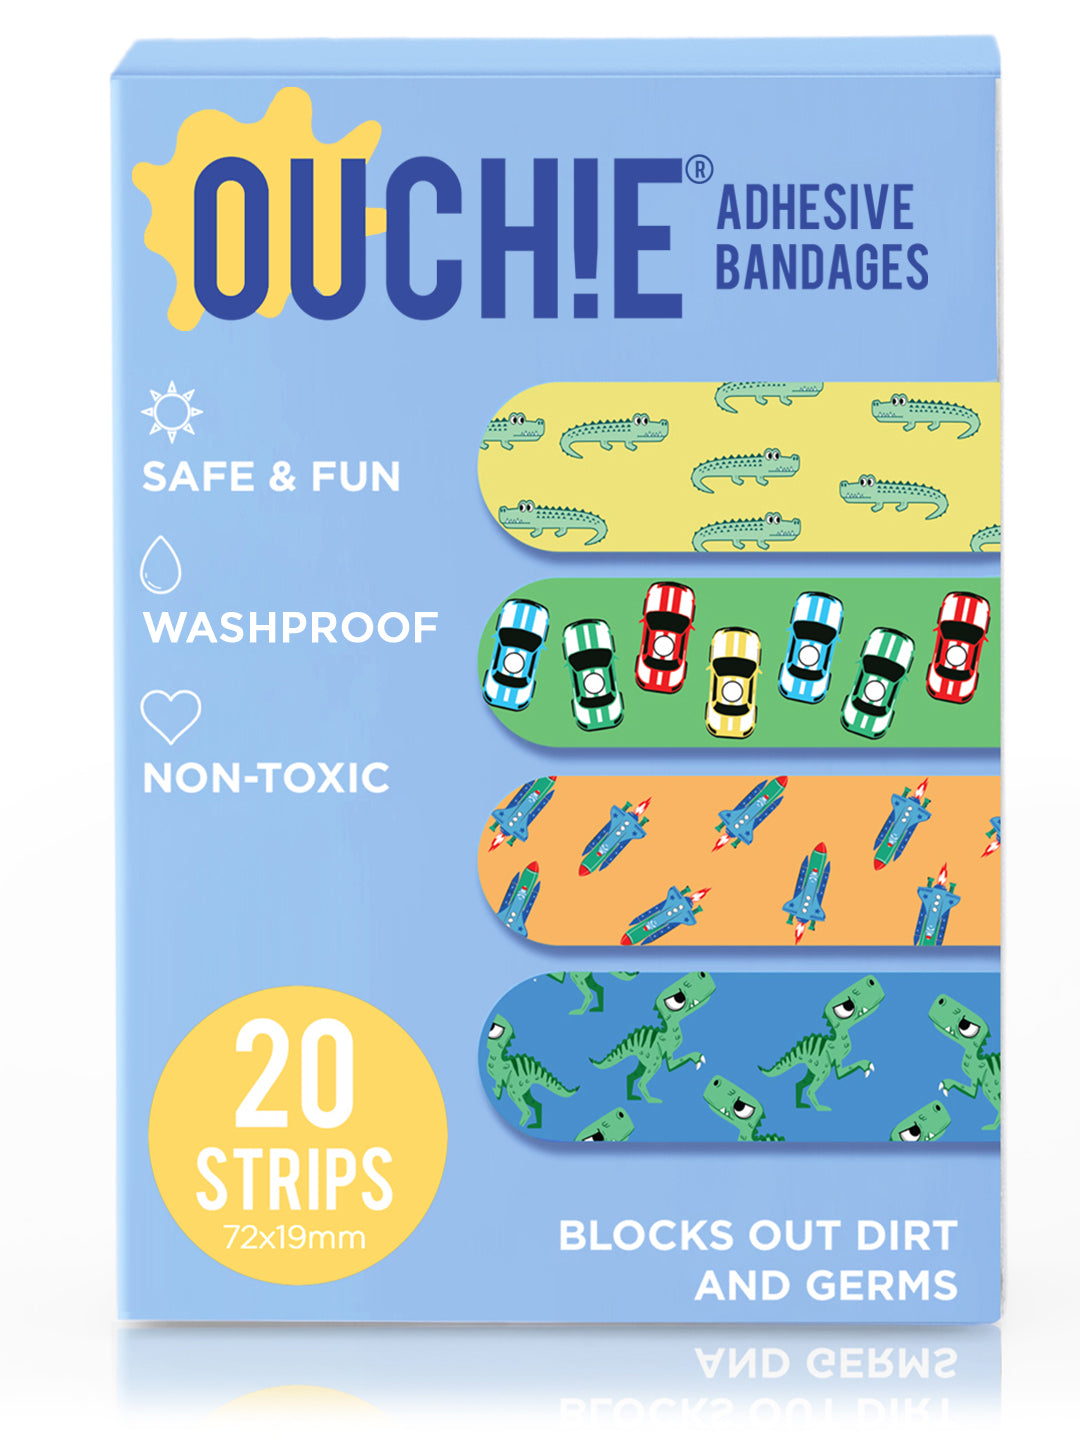 Ouchie Non-Toxic Printed Bandages Double Combo Set (40 Pack) - Blue & Lime Green